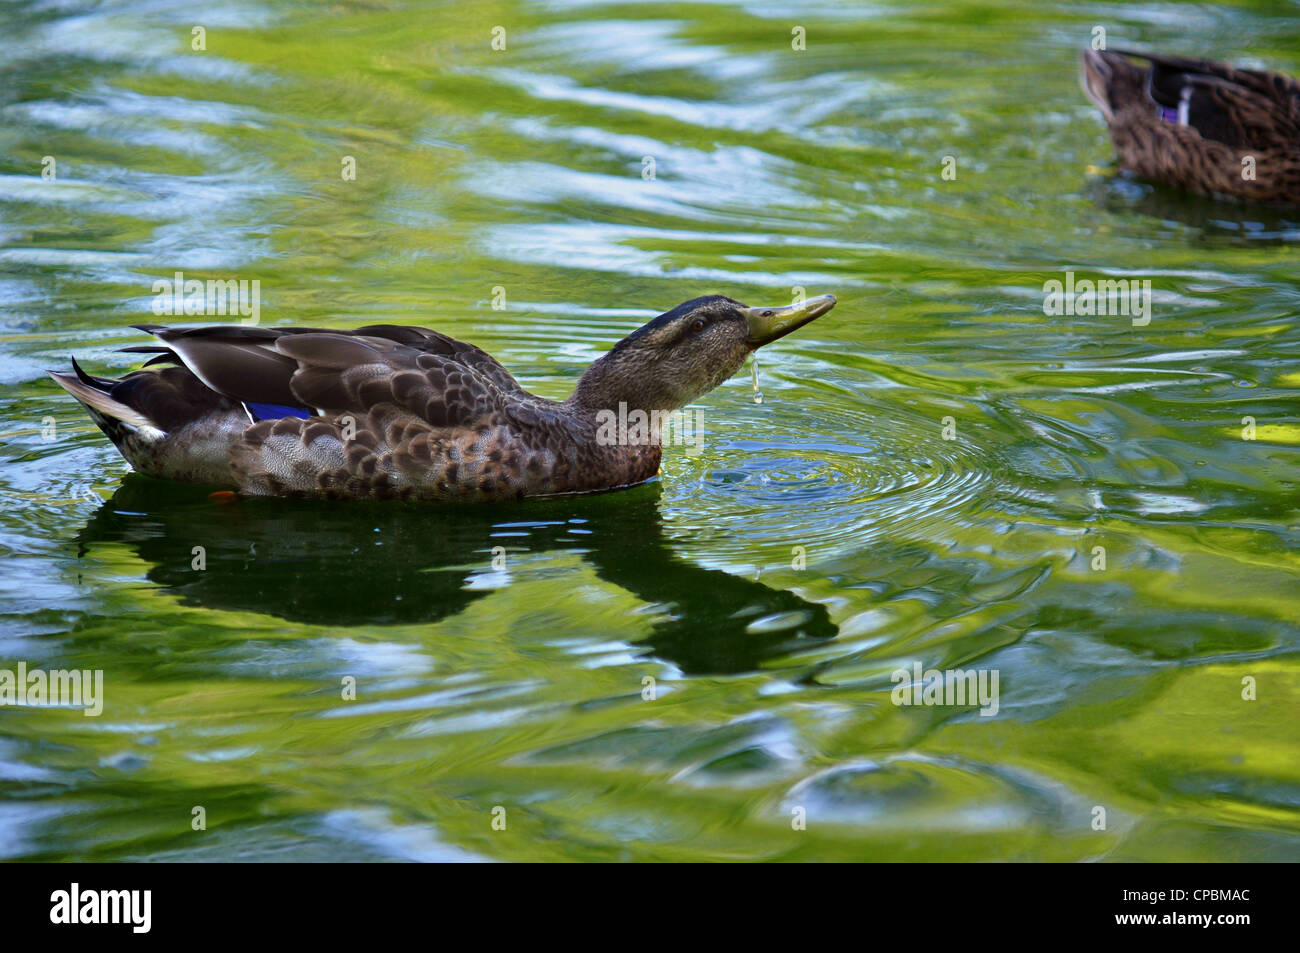 Female wood duck drinking water in green reflecting pond water Stock Photo